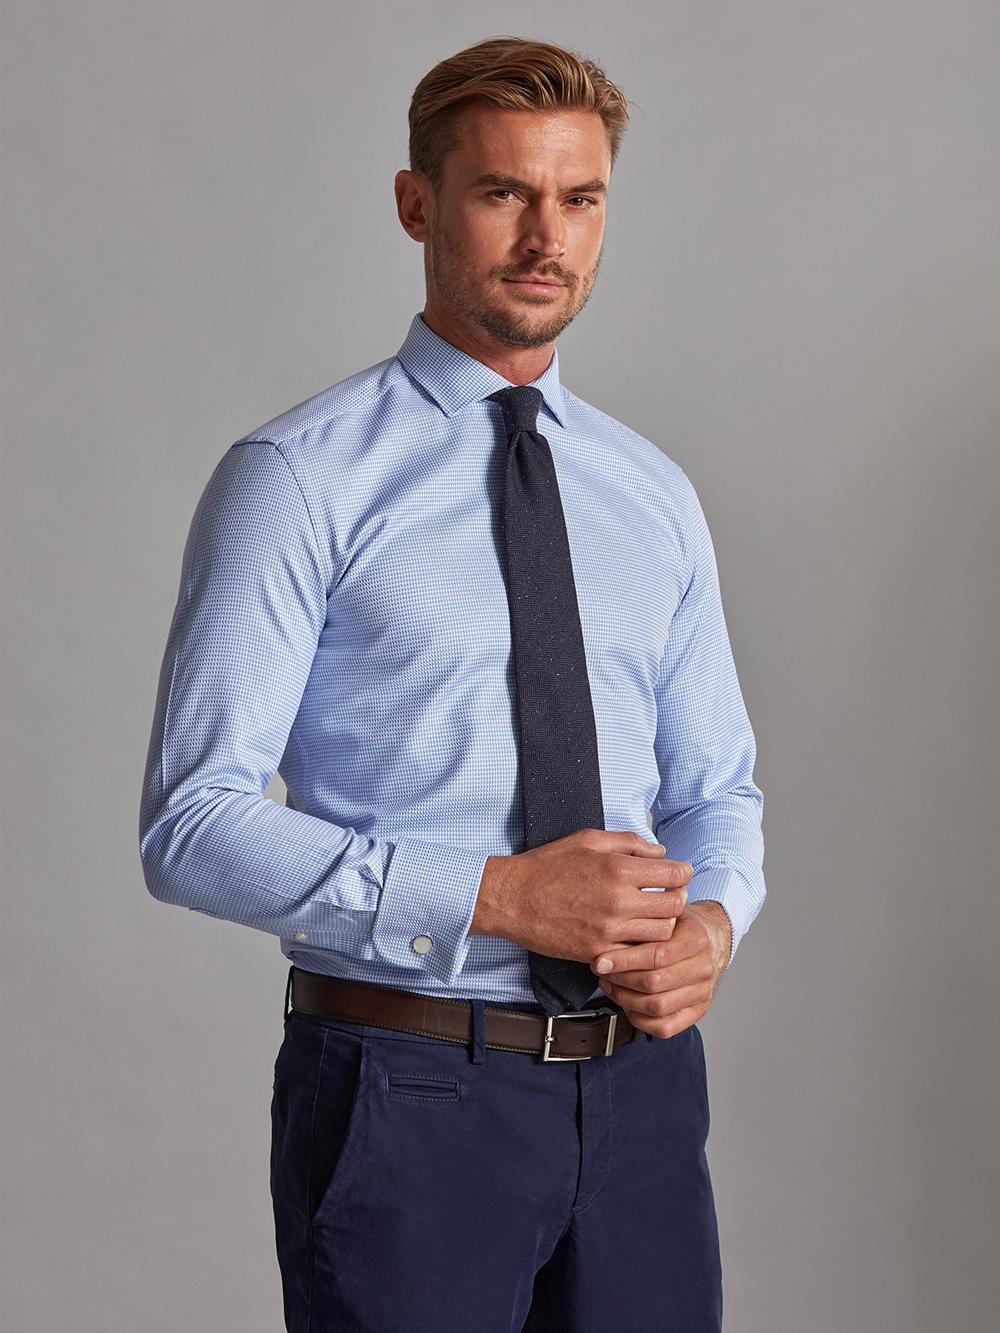 Willy sky blue twill shirt - Musketeer cuffs